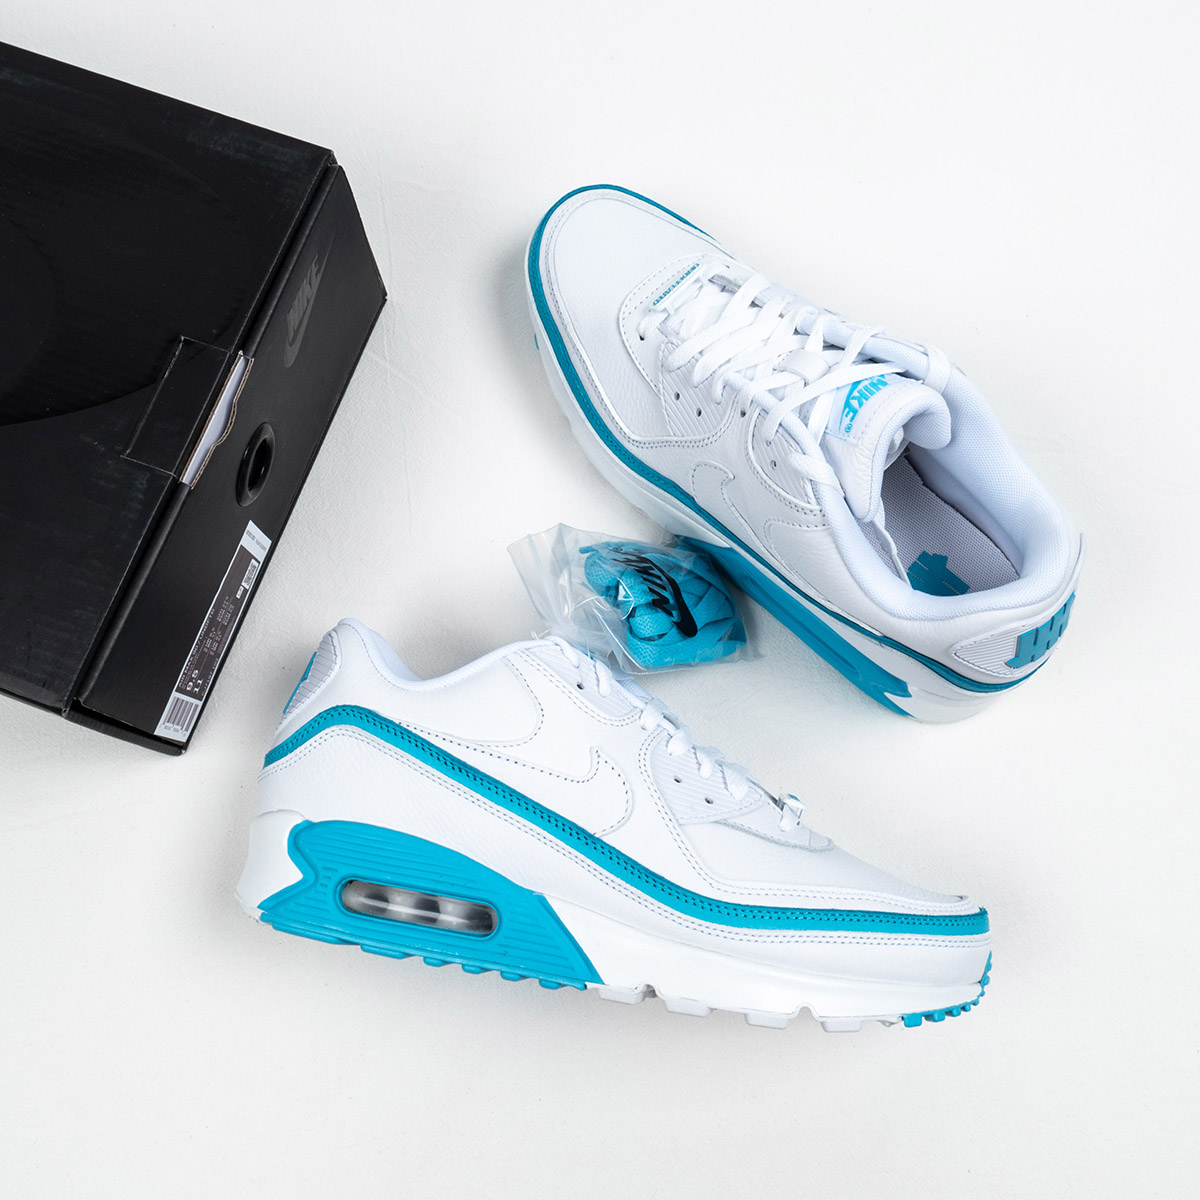 Undefeated x Nike Air Max 90 White/Blue Fury Shoes